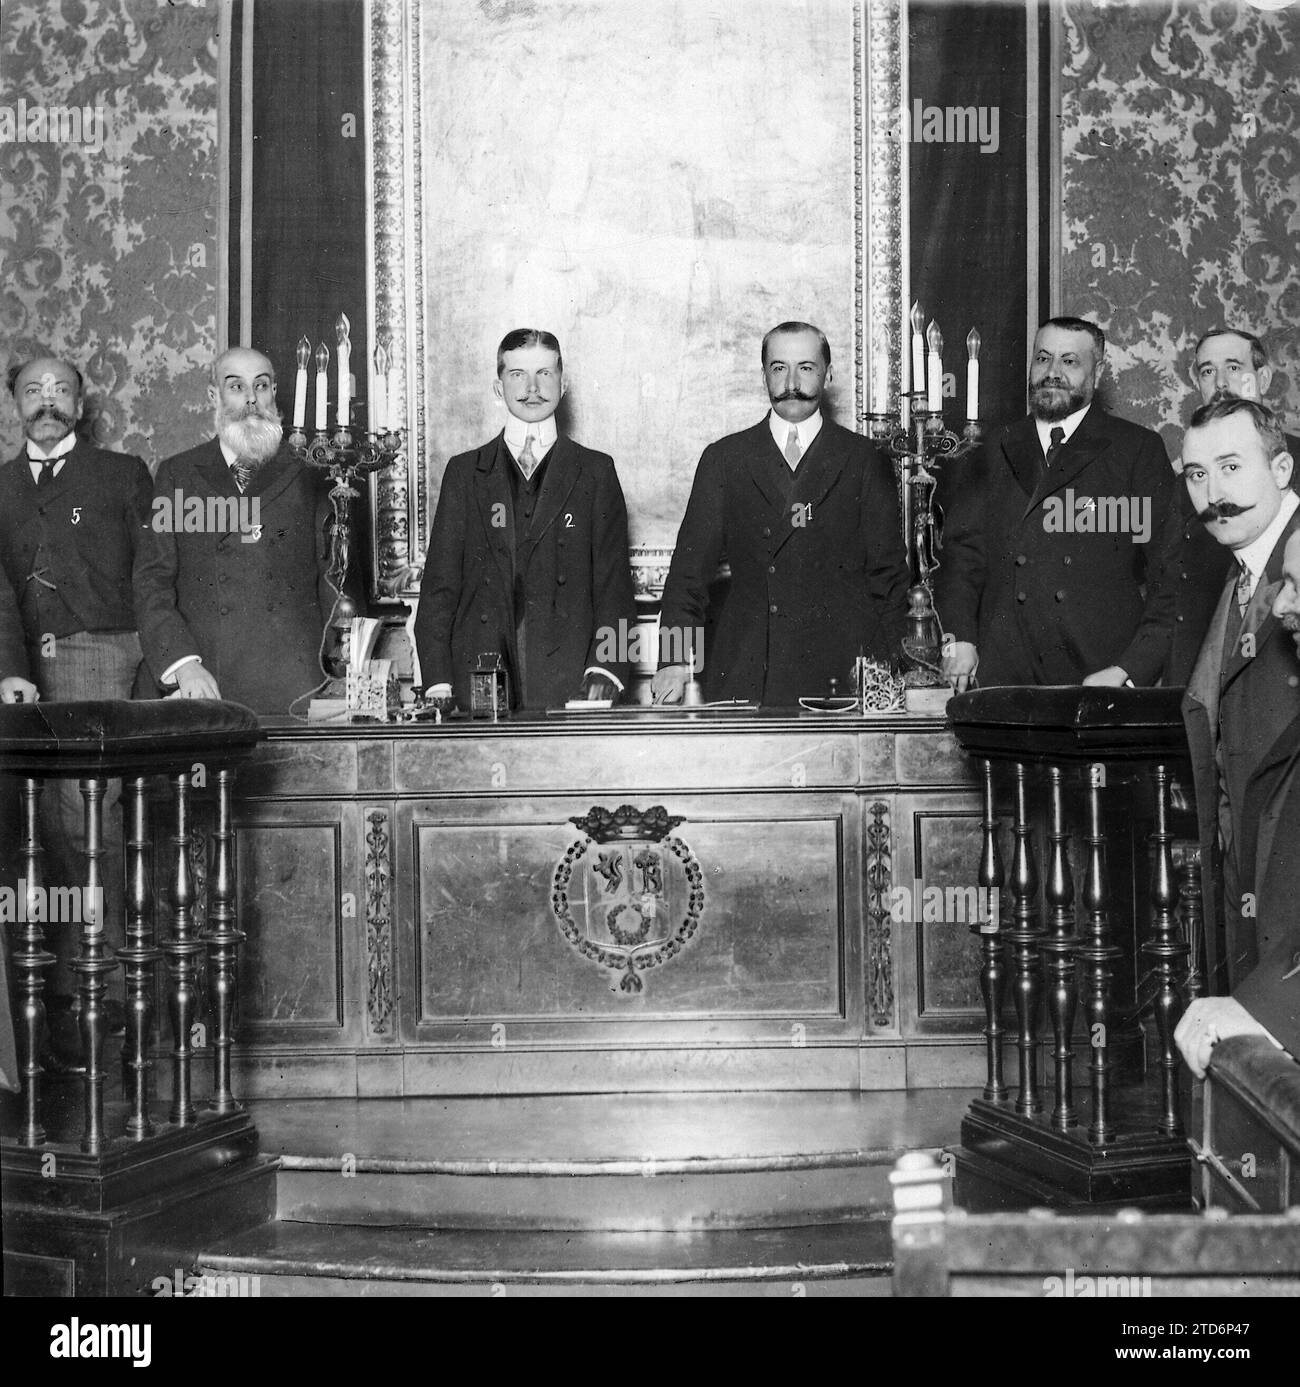 01/20/1911. The Matritense Charity Association. H.H. Ah. Rr. the Infantes D. Carlos (1) and D. Fernando (2) the civil governor Mr. Fernández Latorre (3) the Mayor, Mr. Francos Rodríguez (4) and Mr. Conde de Peñalver (5) Presiding over the solemn session Verified yesterday afternoon at City Hall. (Goñi photo). Credit: Album / Archivo ABC / Francisco Goñi Stock Photo